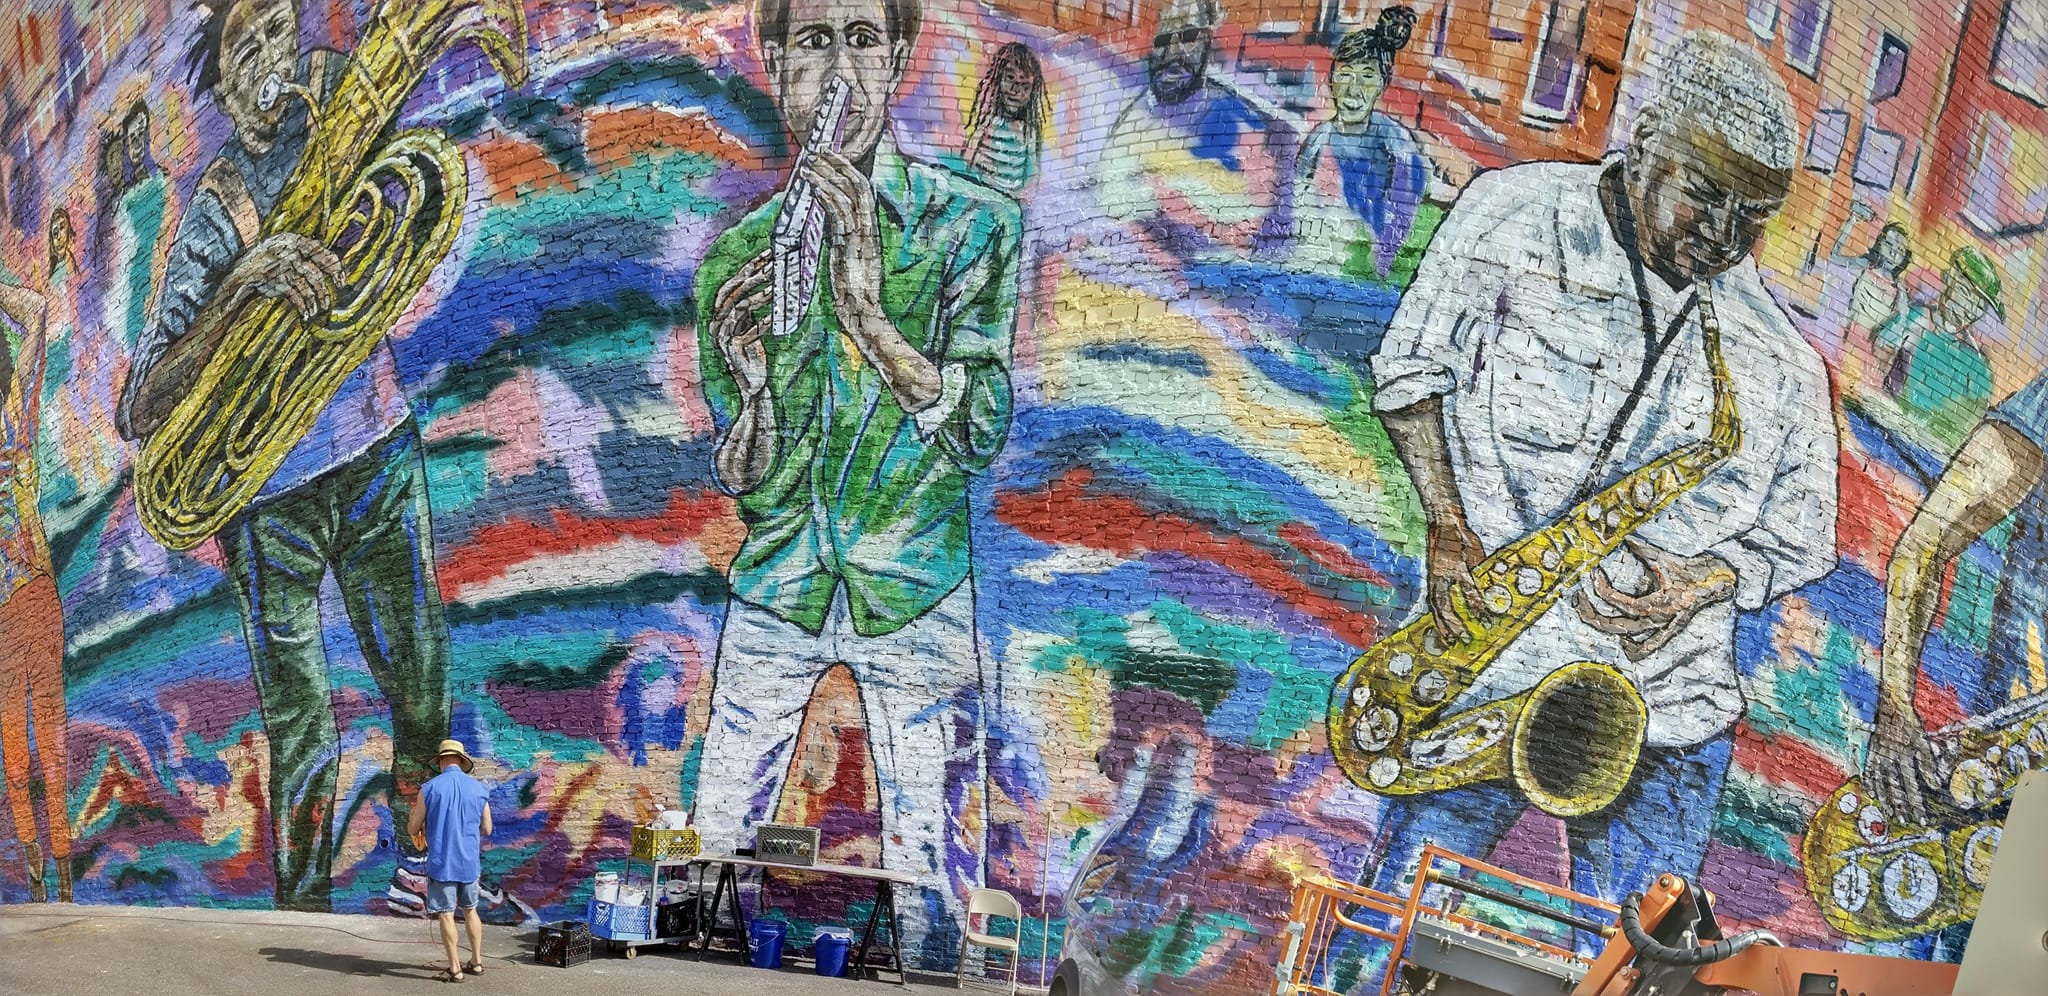 Jazz players mural in Anniston Alabama